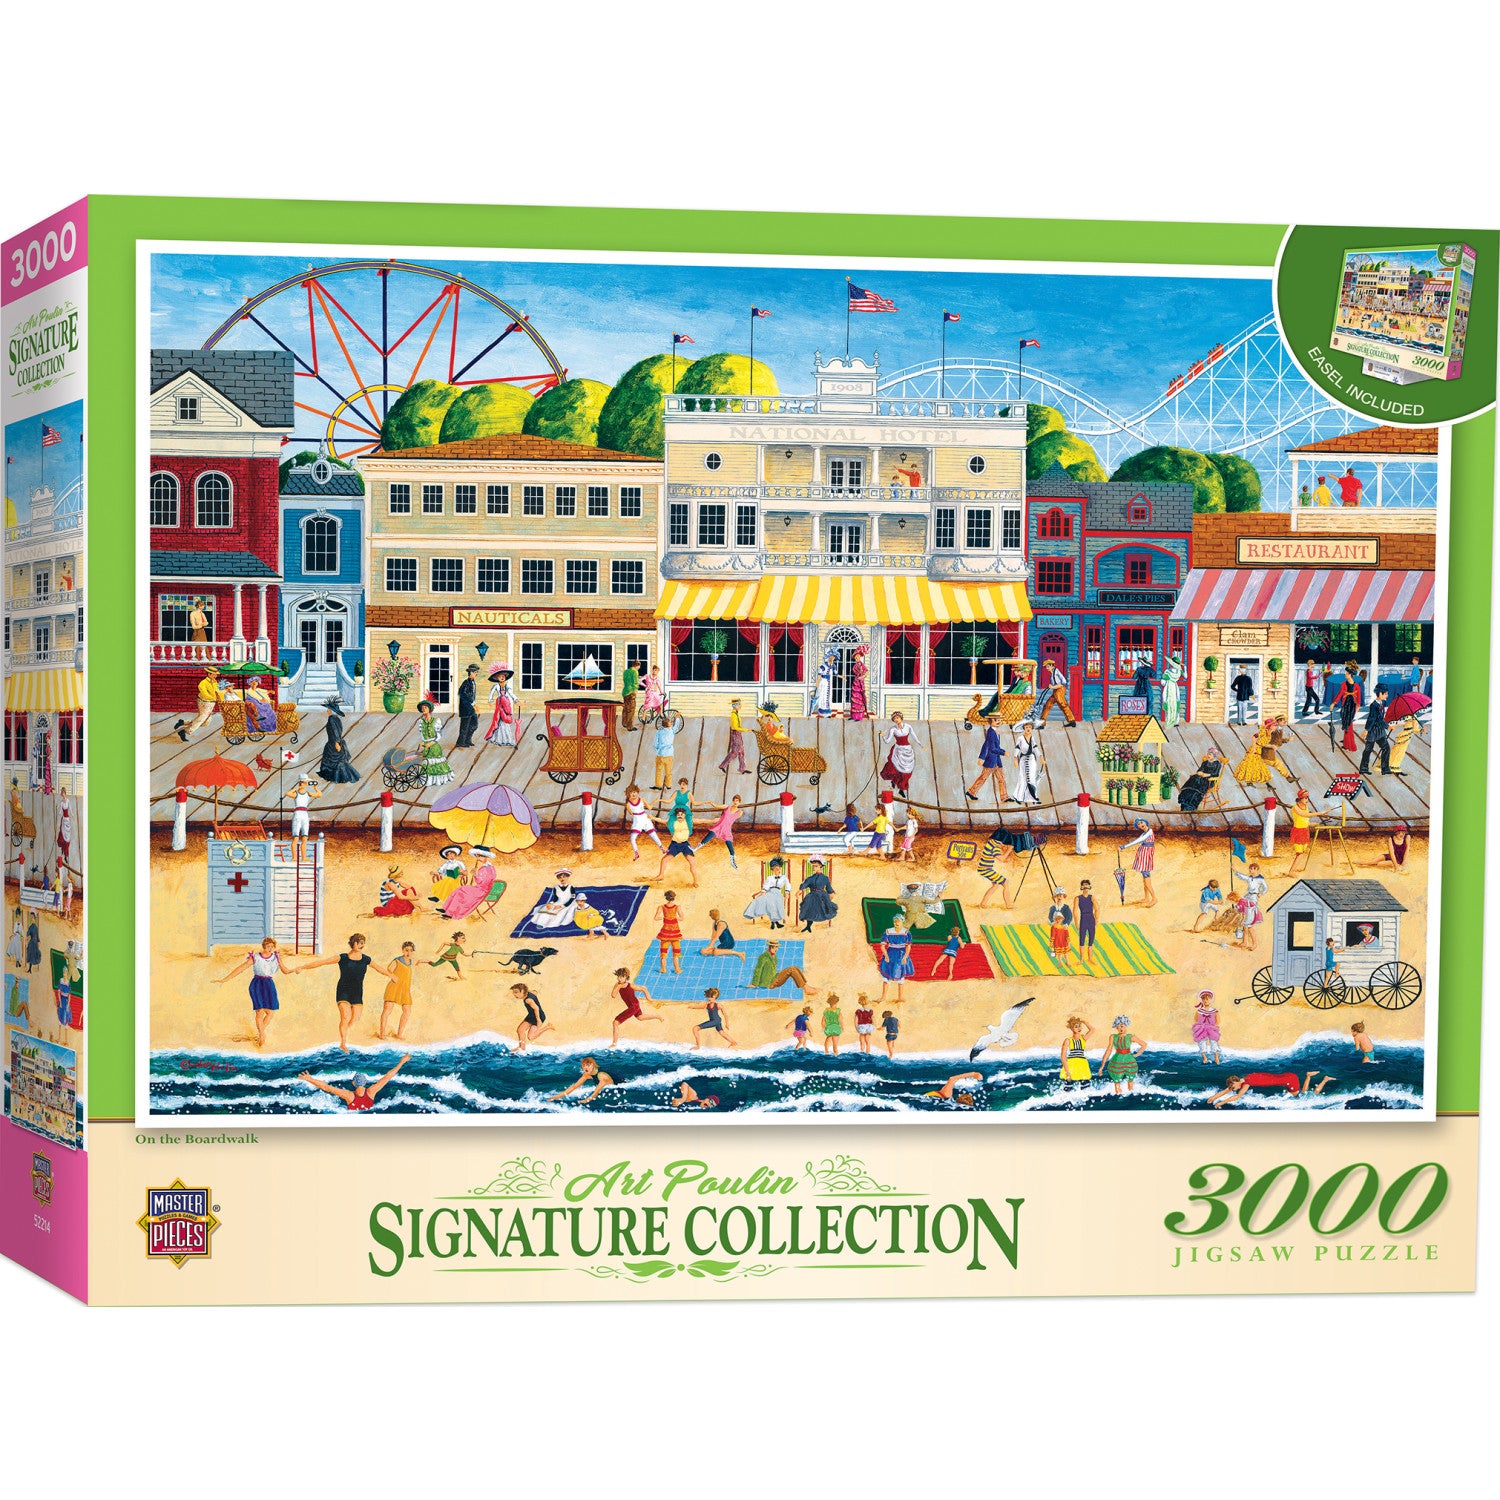 Signature Collection - On the Boardwalk 3000 Piece Jigsaw Puzzle